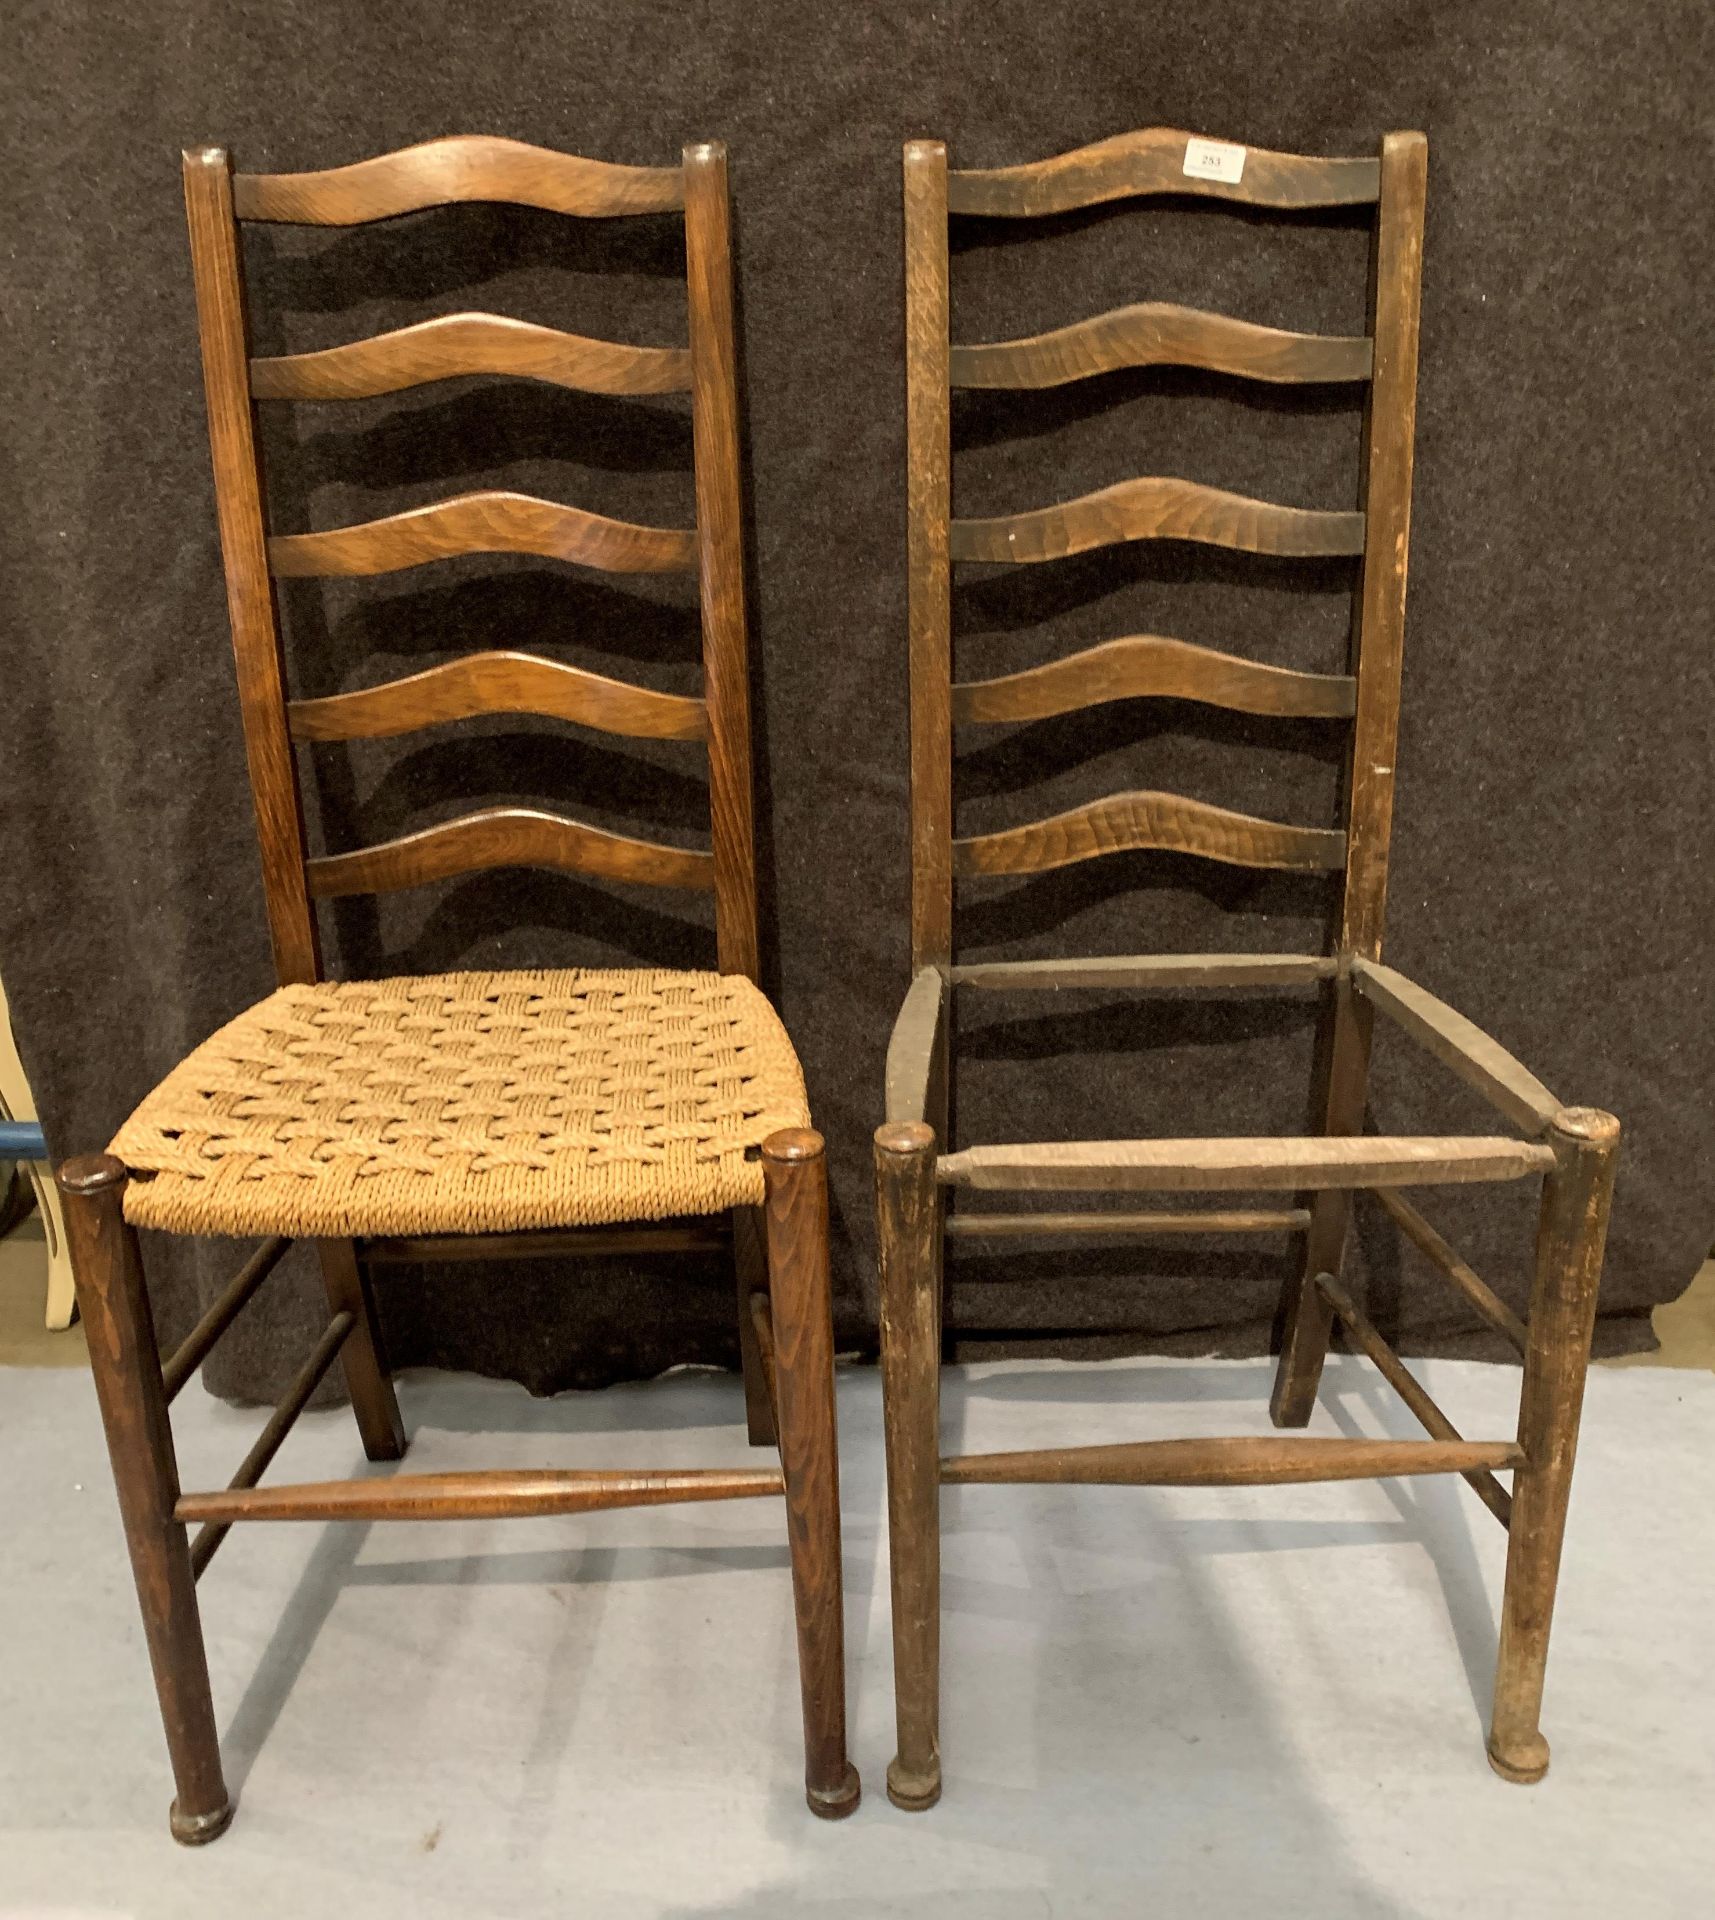 Two ladderback bedroom chairs - one lacks seat